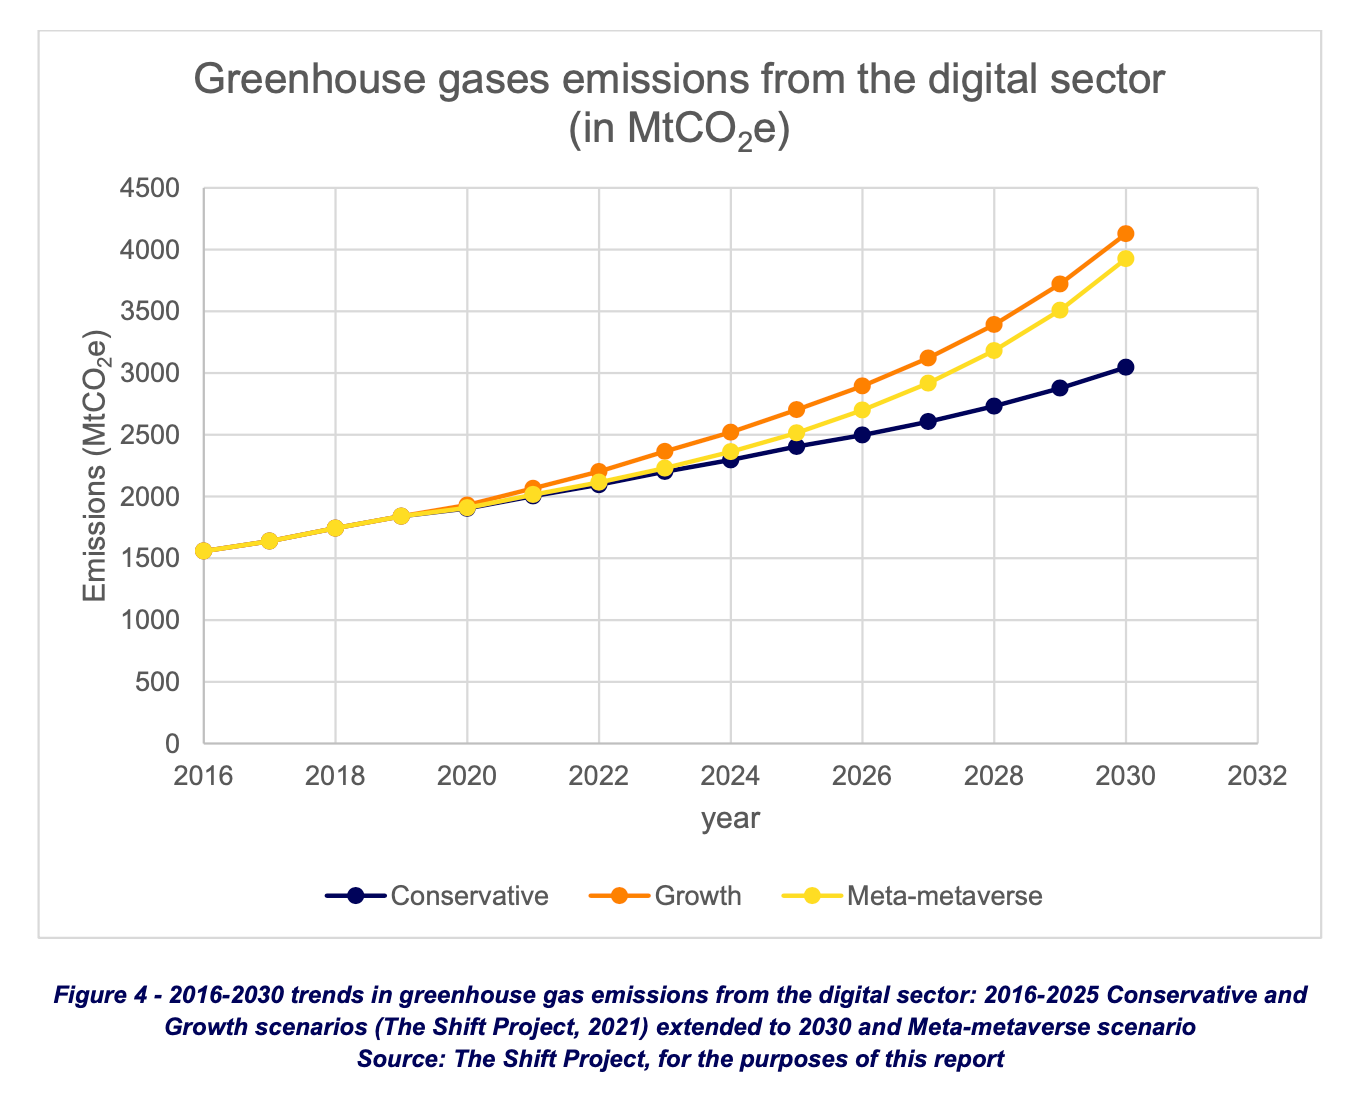 Big-picture trends from 2023 in games, and unsustainable emissions trajectories